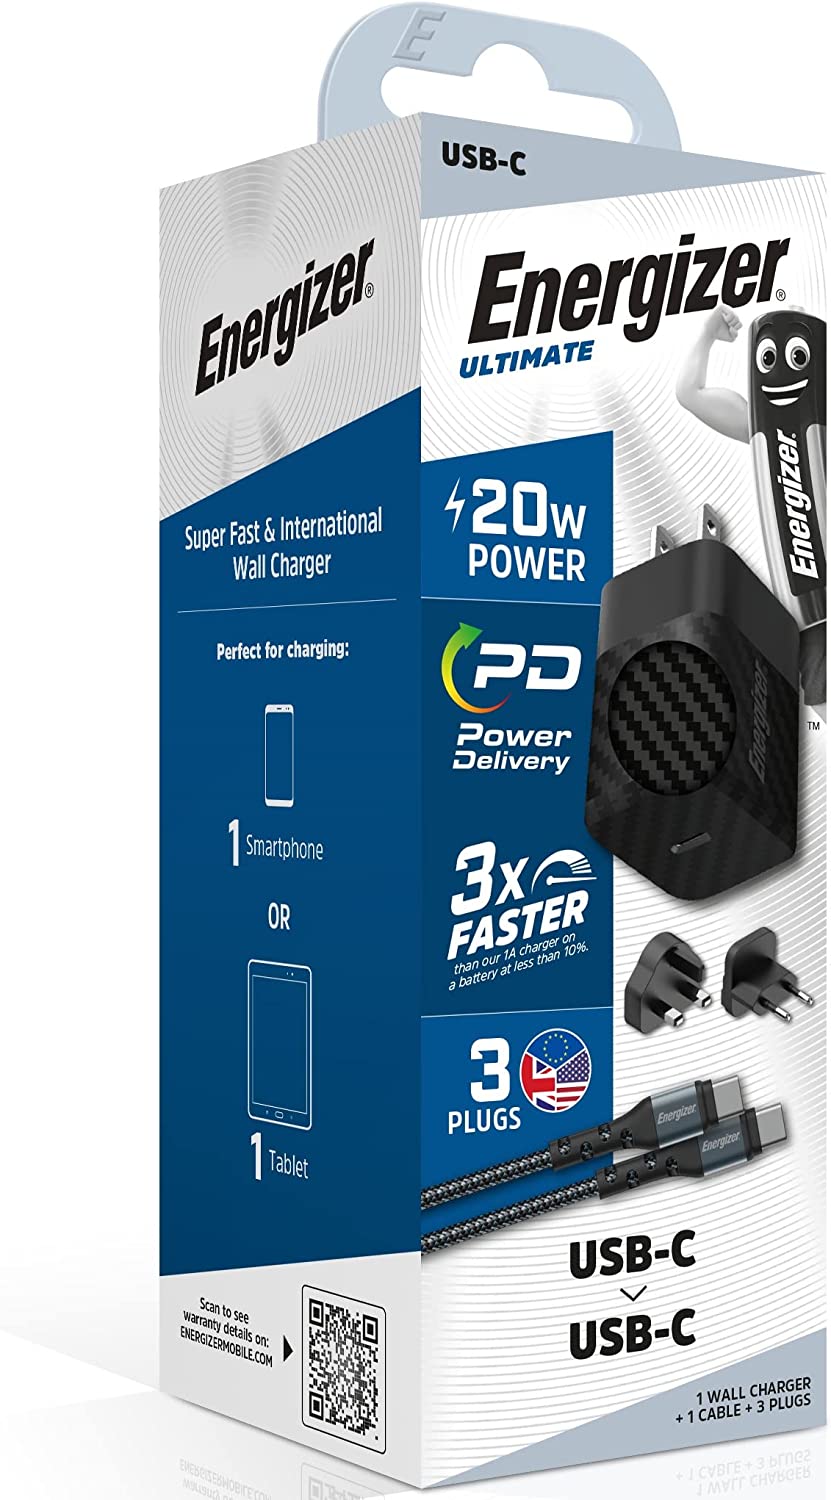 Energizer Ultimate A20MUC Power Delivery Charger - 20W - USB-C cable included - EU / UK / US